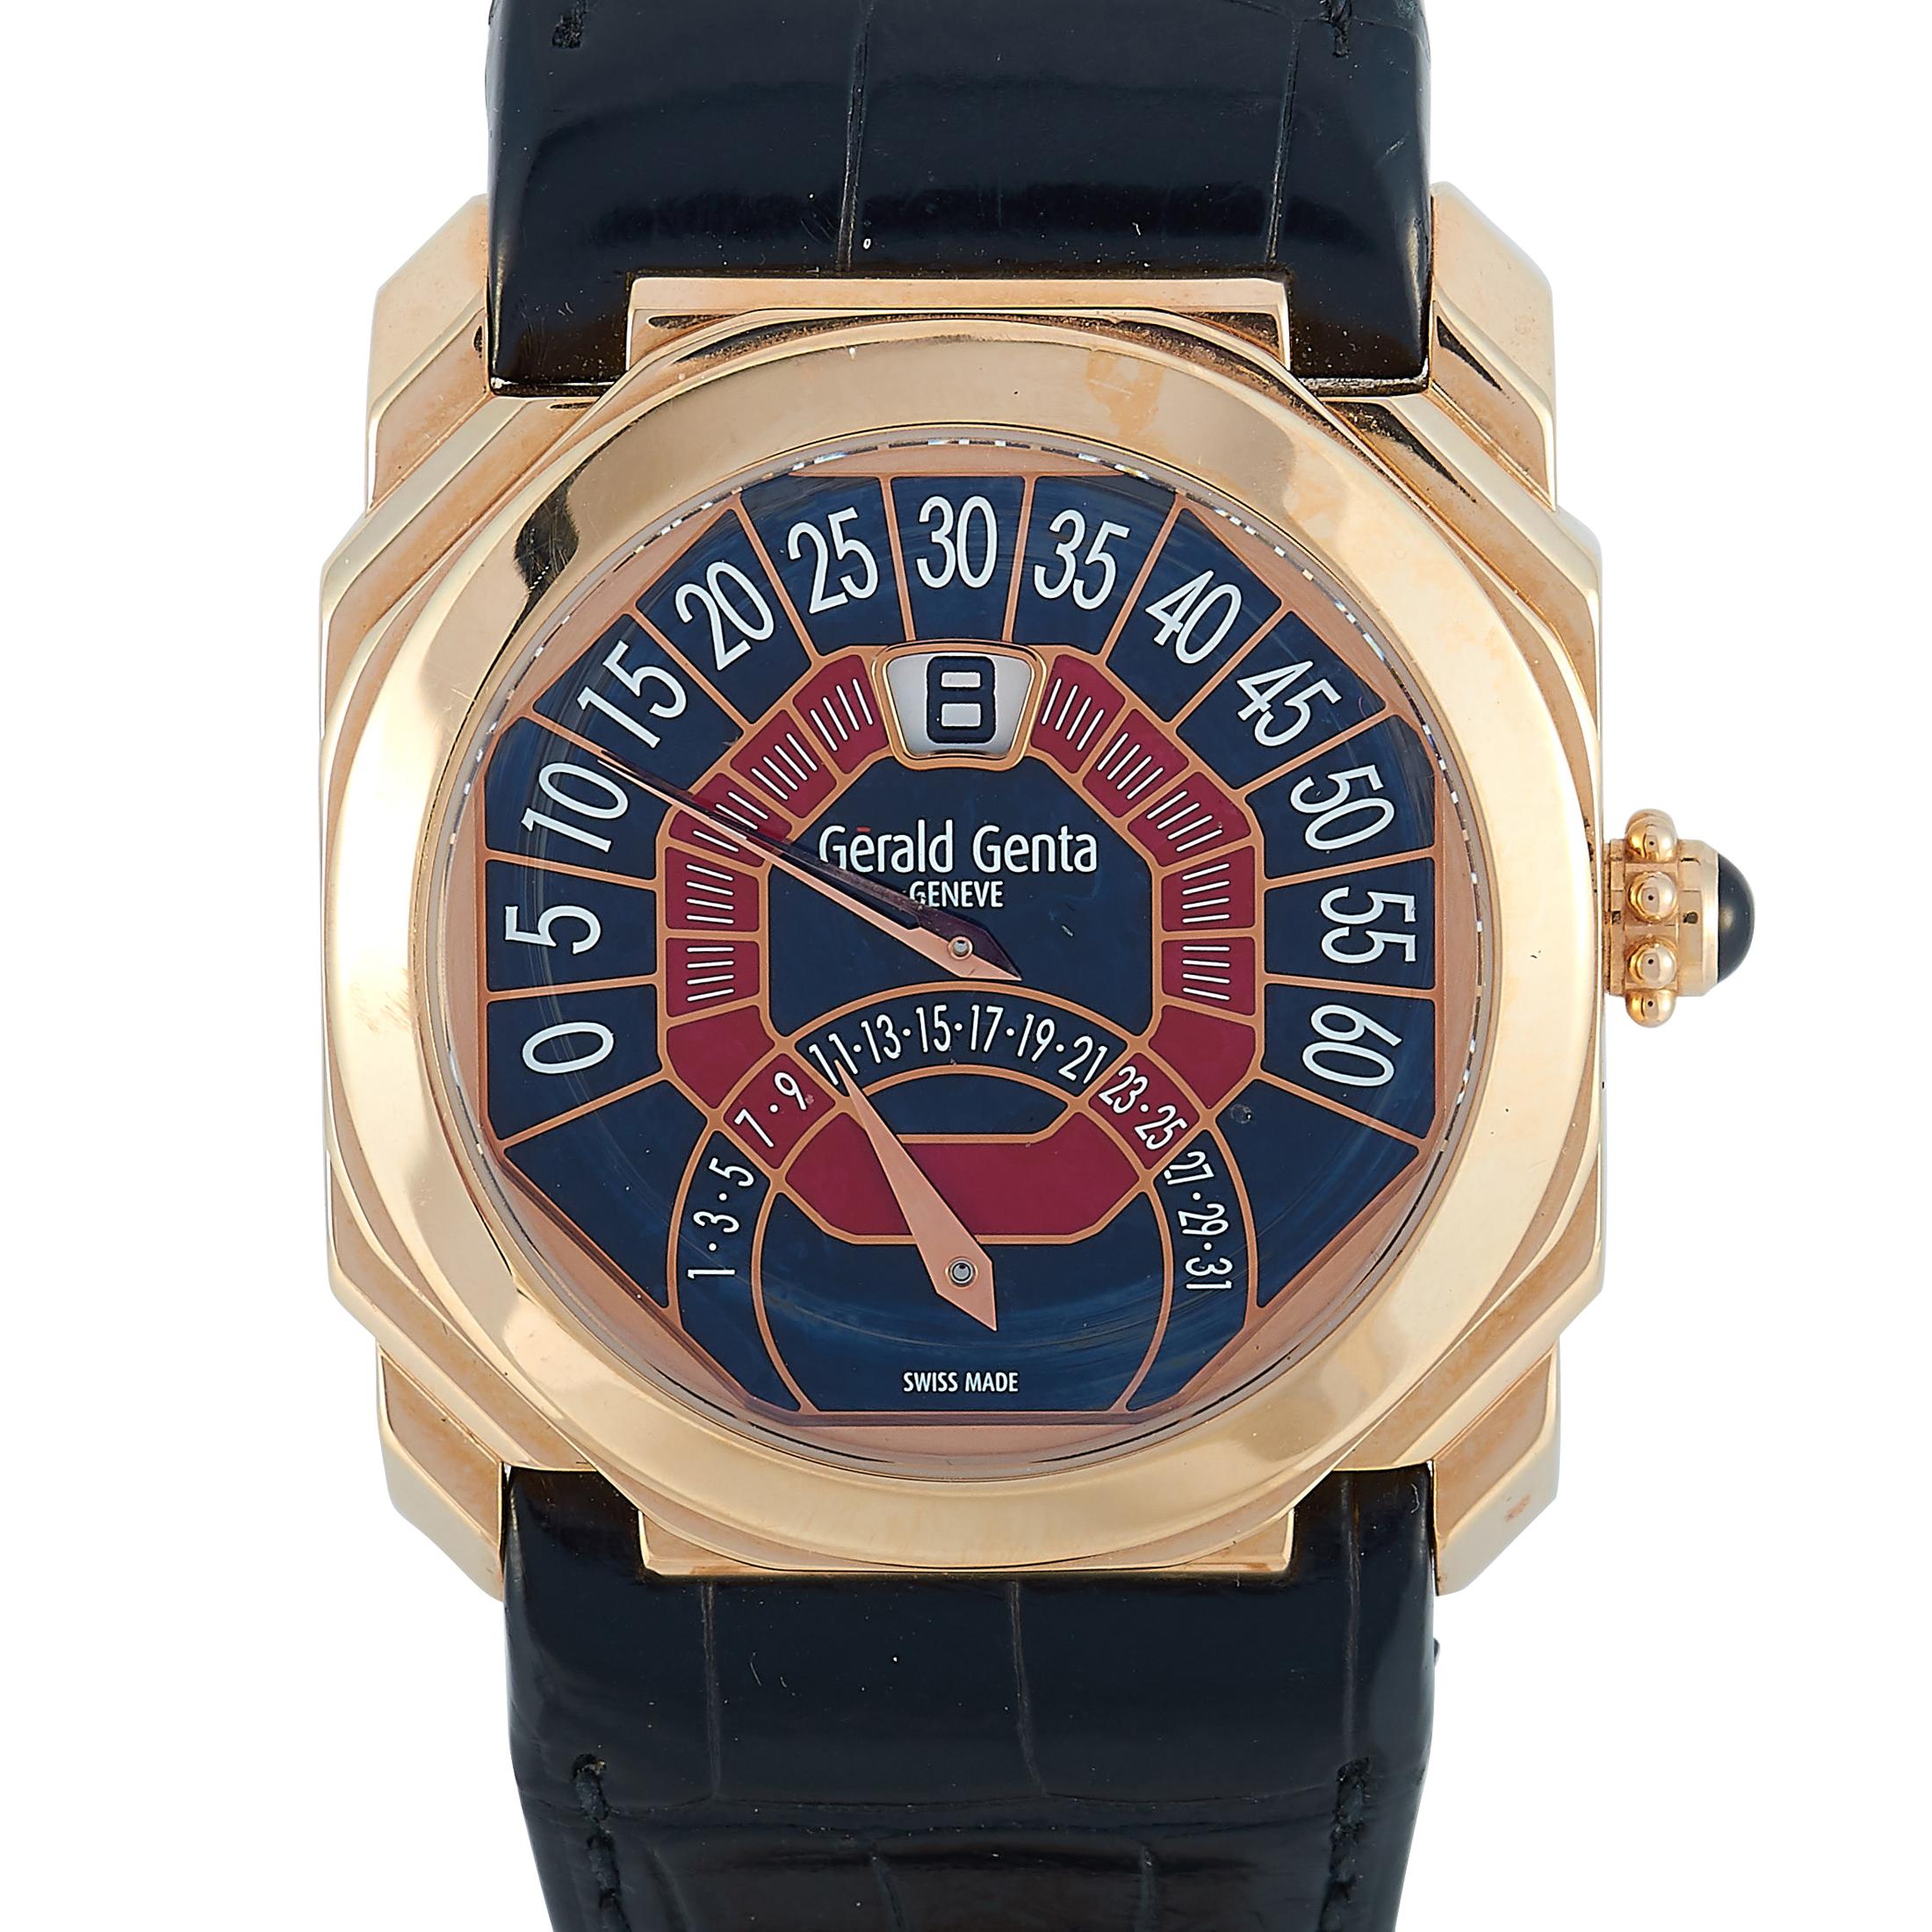 This is the Gerald Genta Octo Bi-Retro, reference number OBR.Y.50.

The watch is presented with a 43 mm 18K rose gold case that boasts transparent back. It is offered with a black and red dial that features the following functions: jumping hours,